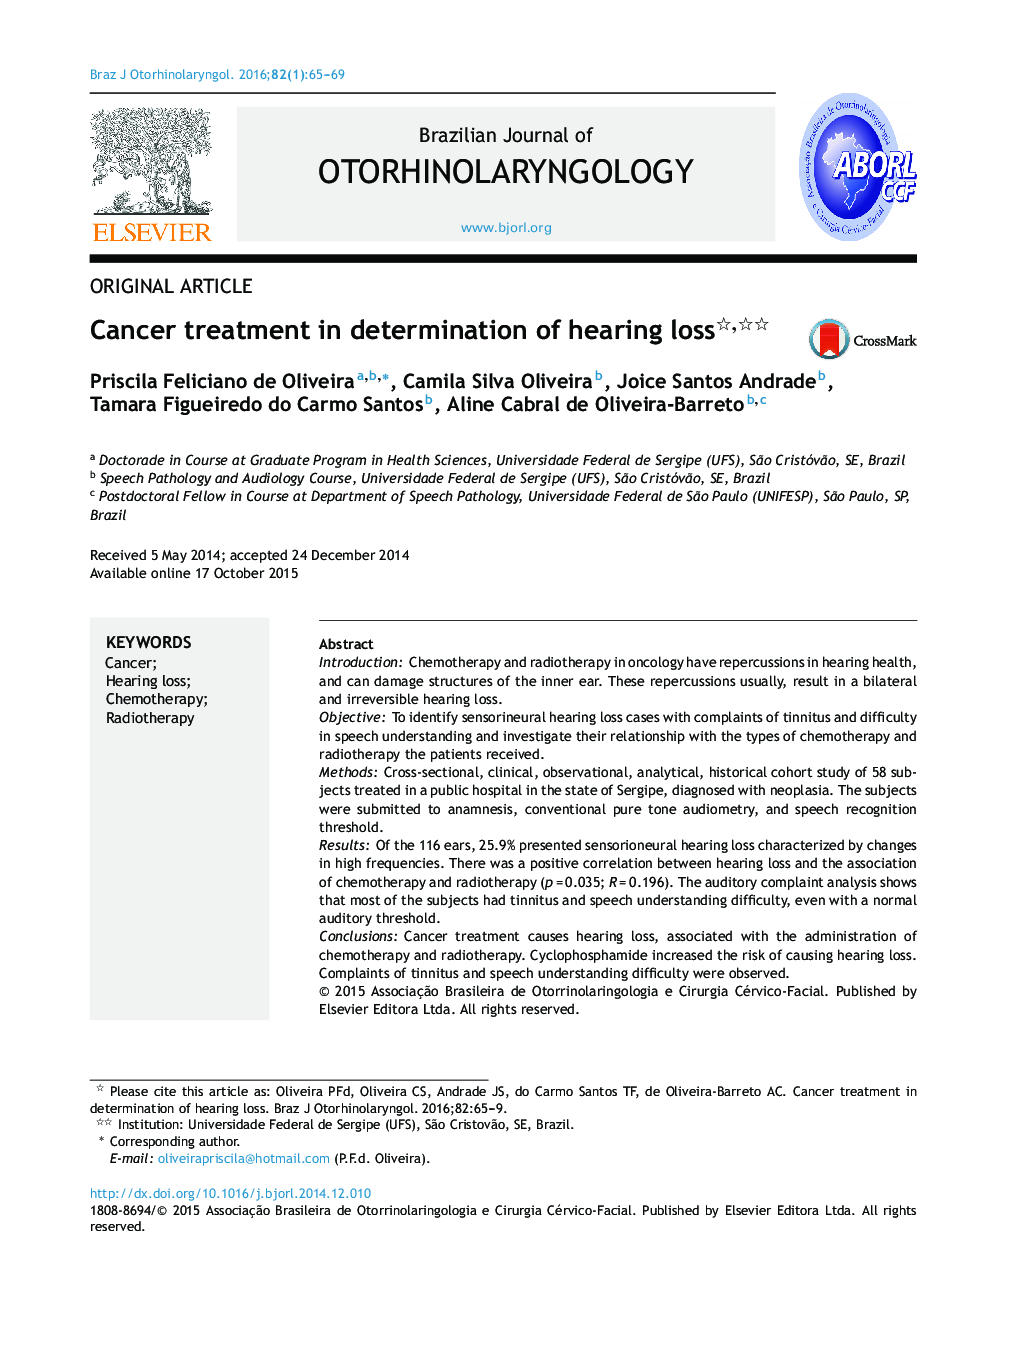 Cancer treatment in determination of hearing loss 